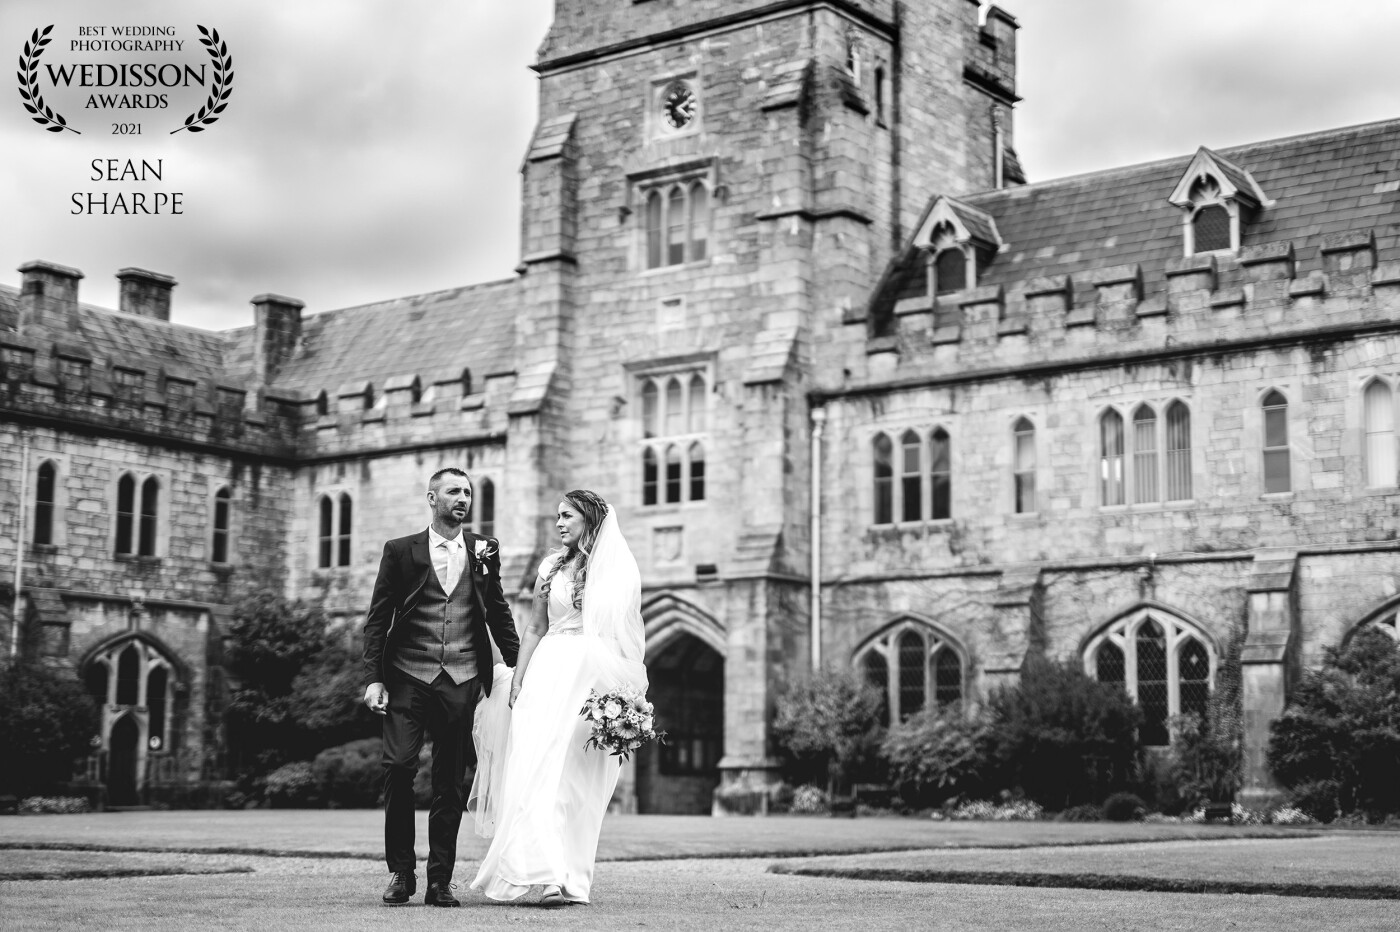 Susan and Donal. What an amazing and fun couple to photograph. Taken at the stunning University College Cork campus inside the main quadrangle.